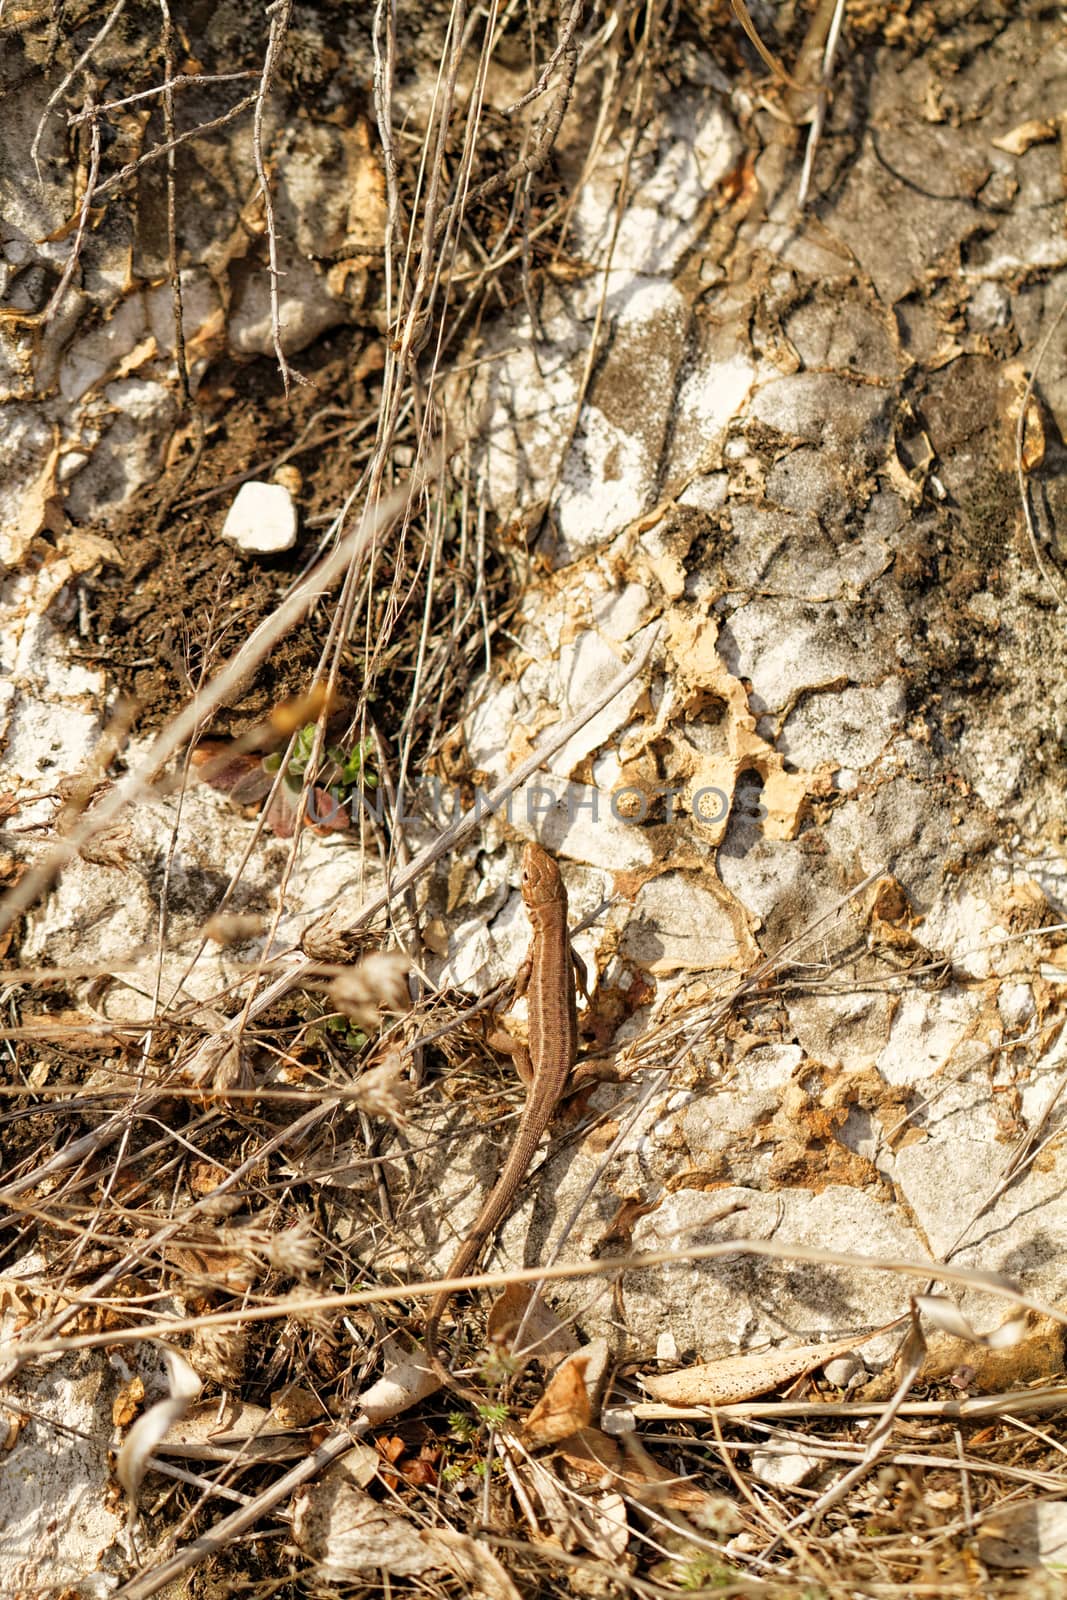 Photo of a small lizard in the hilly place